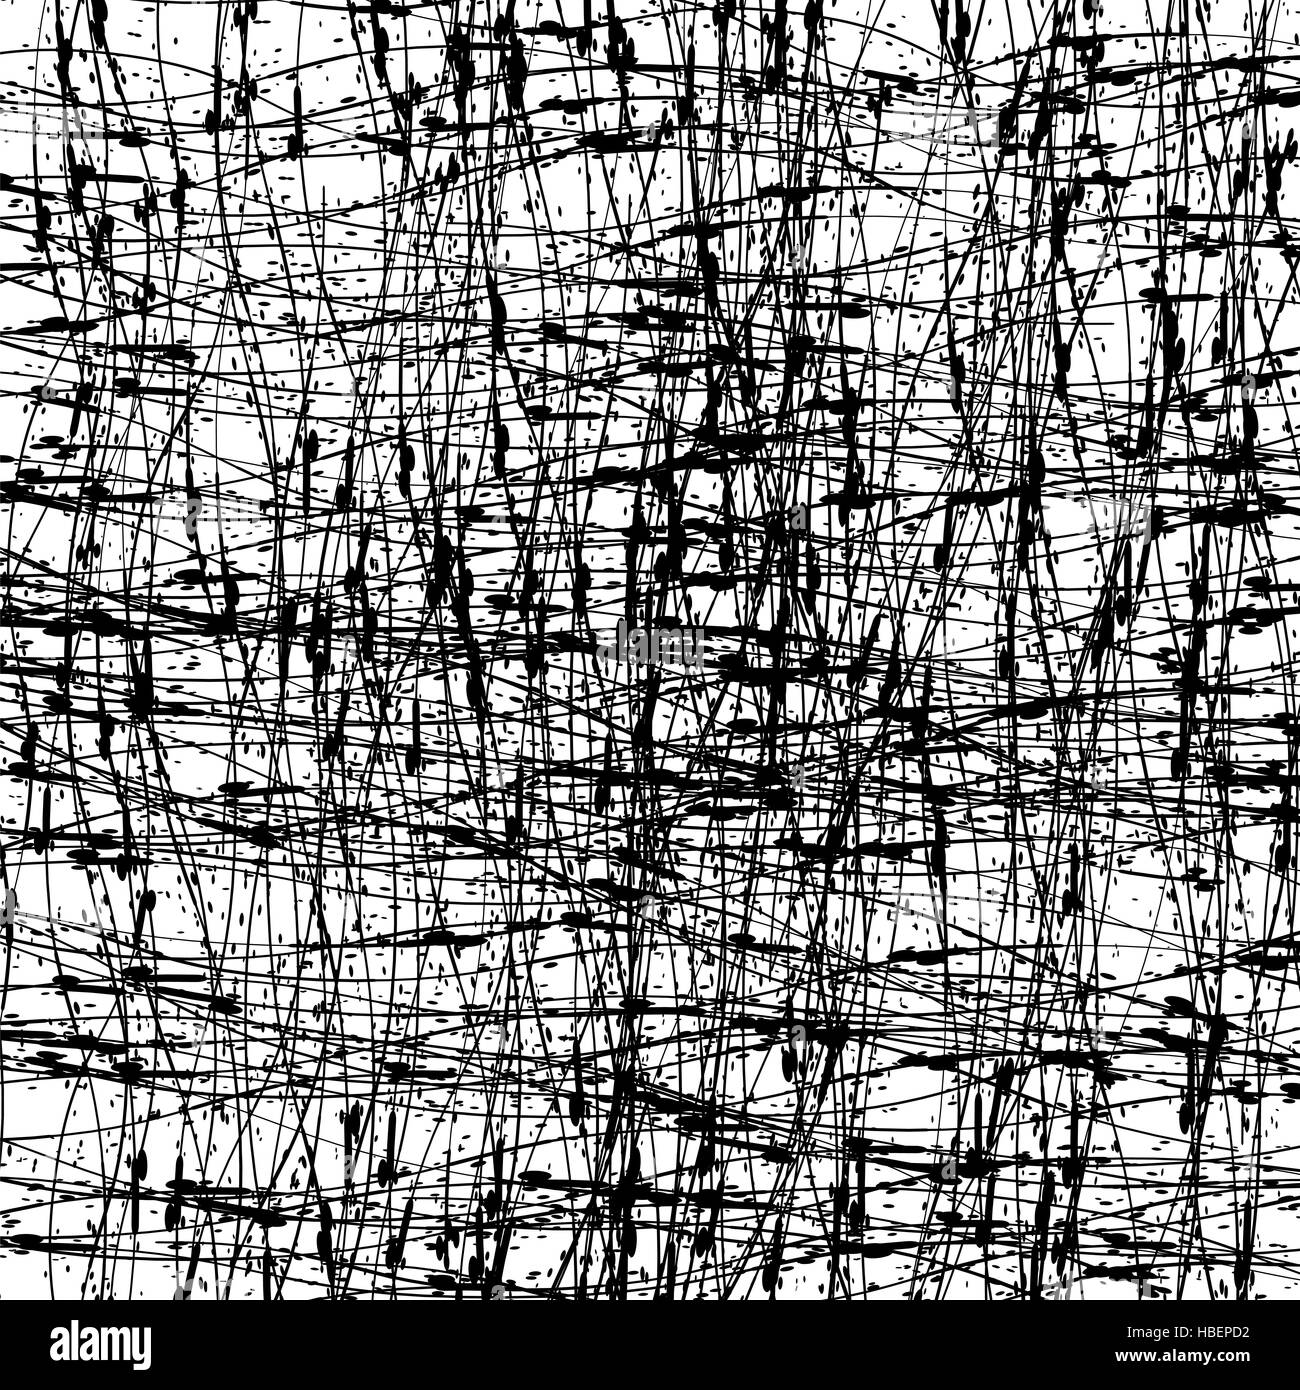 Abstract Grunge Texture. Black Ink Background Stock Photo